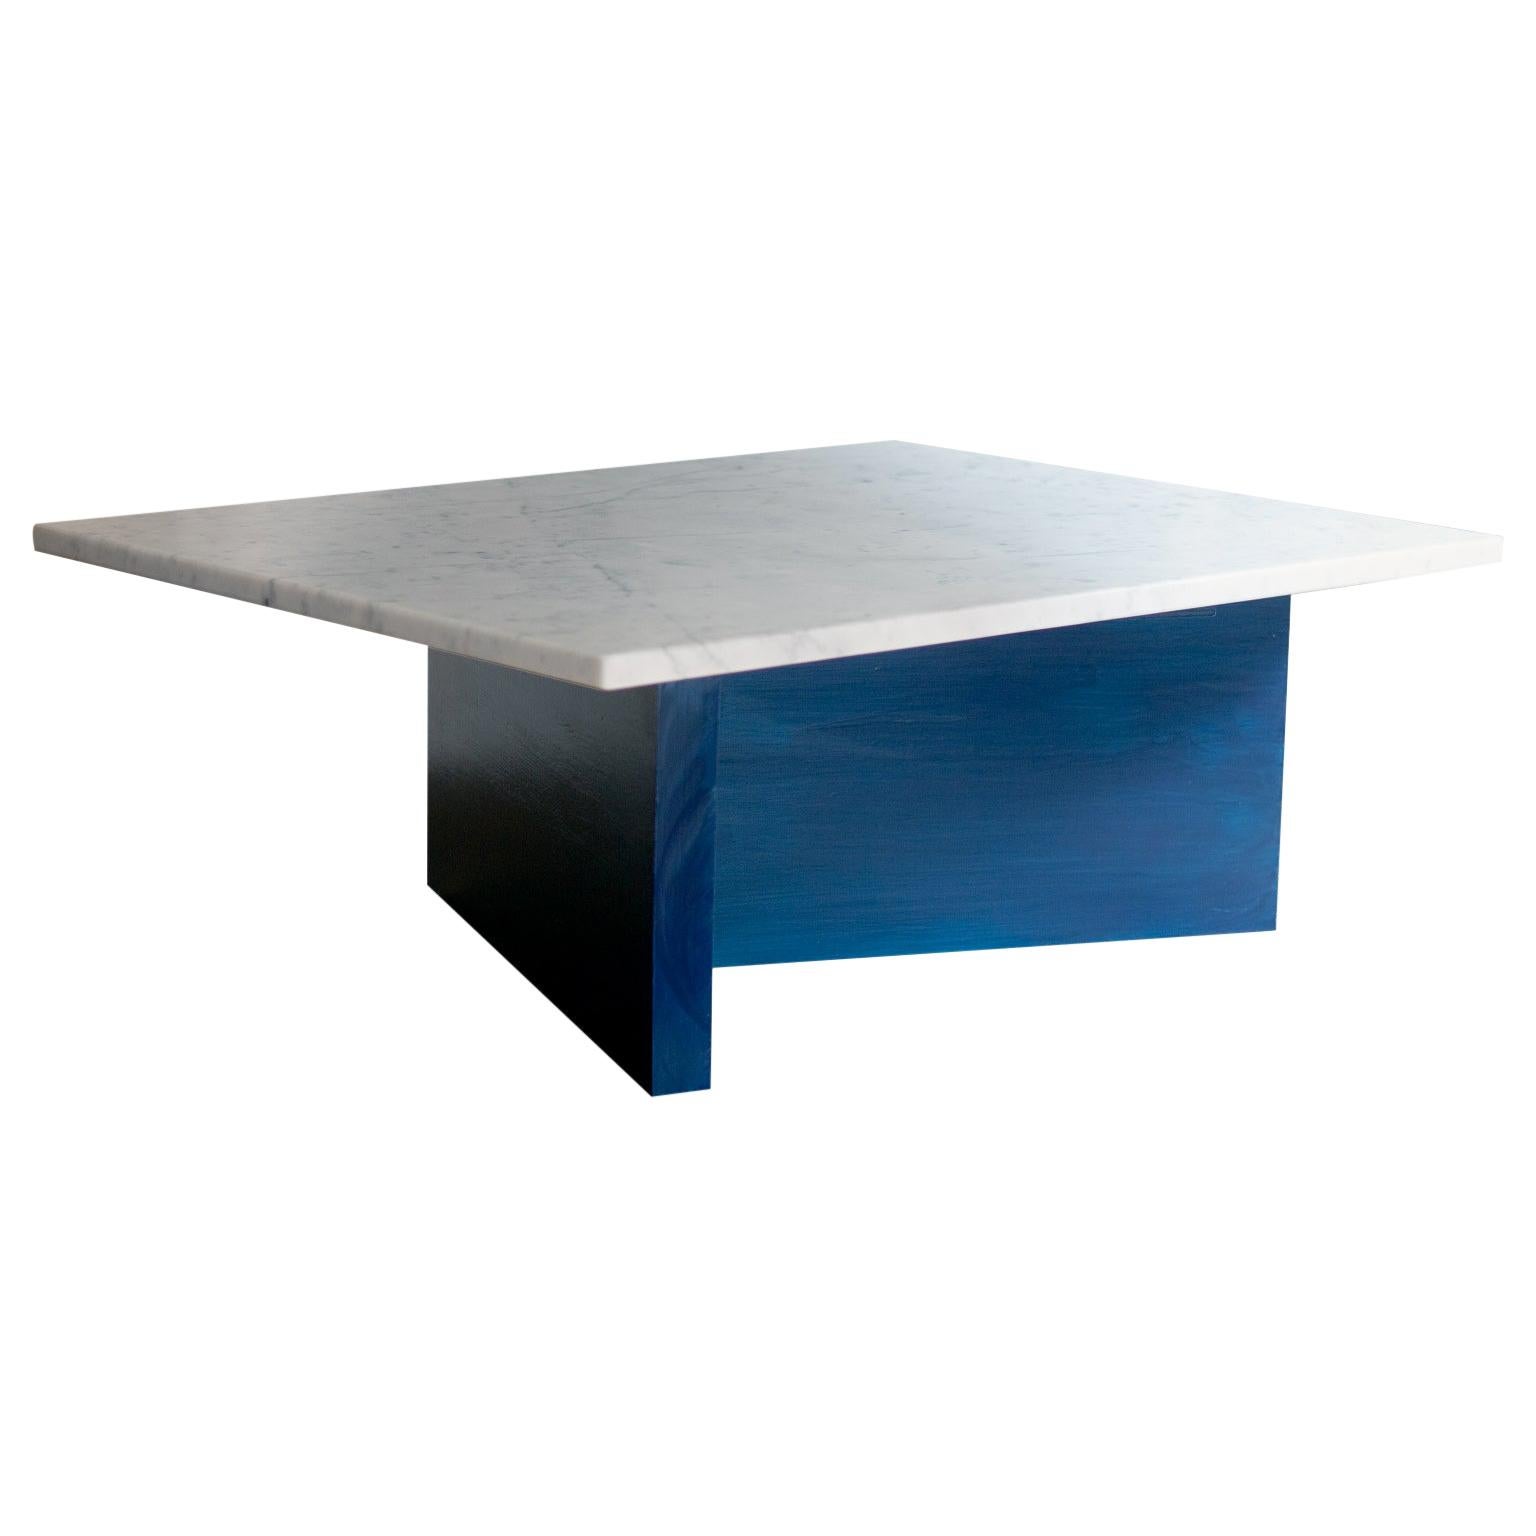 Fallada White Carrara Marble and Blue Ink Lacquered Based Coffee Table For Sale